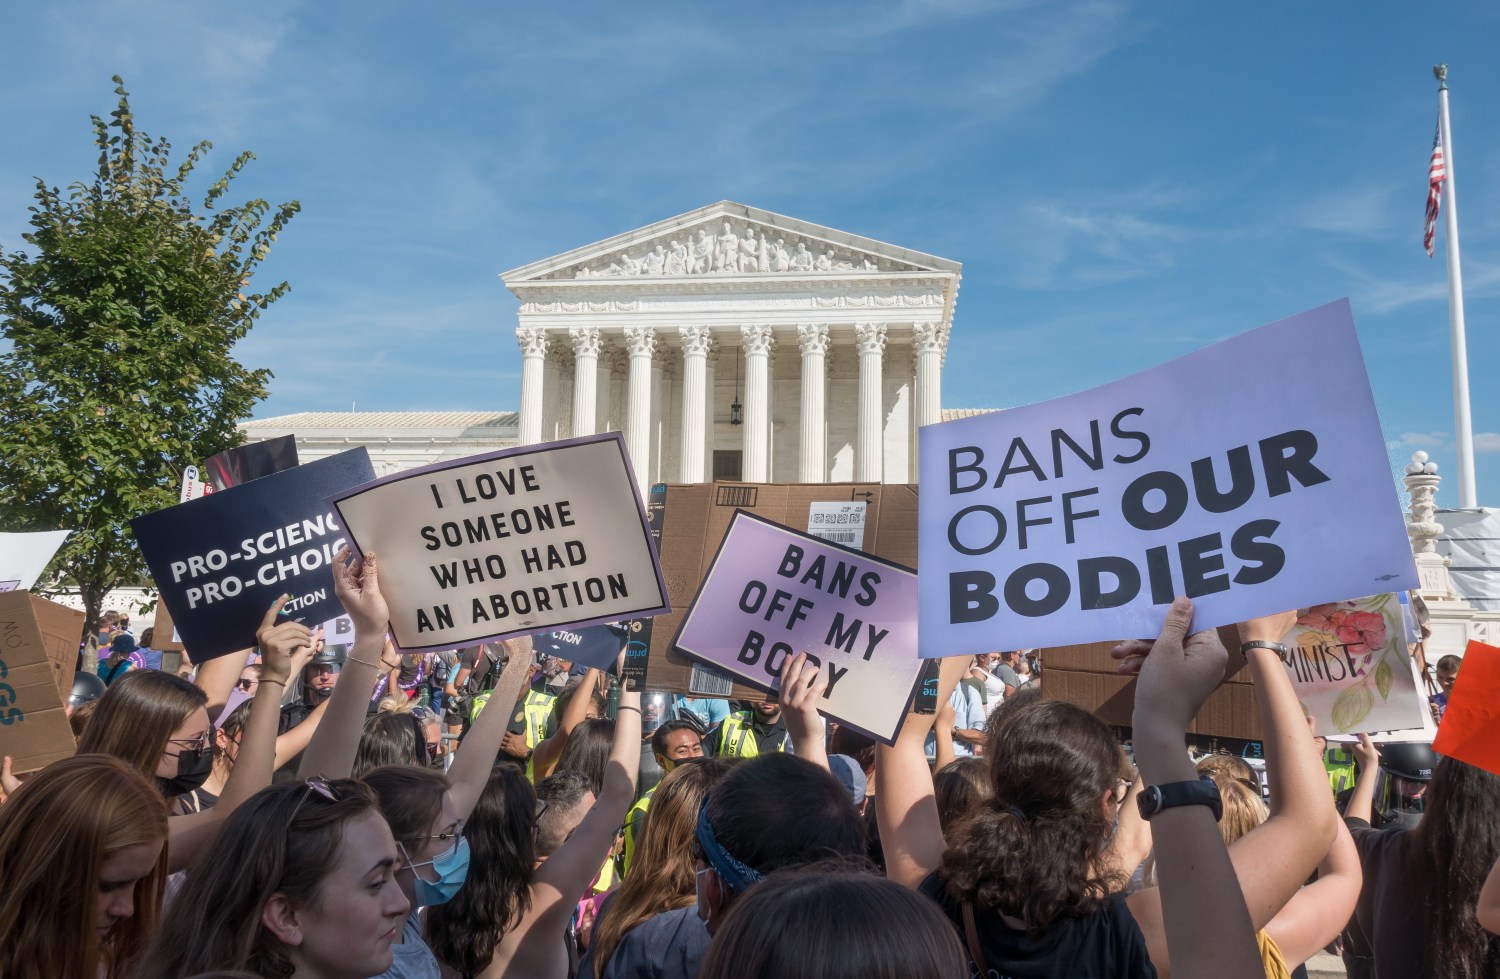 Abortion in Louisiana is illegal immediately after Supreme Court